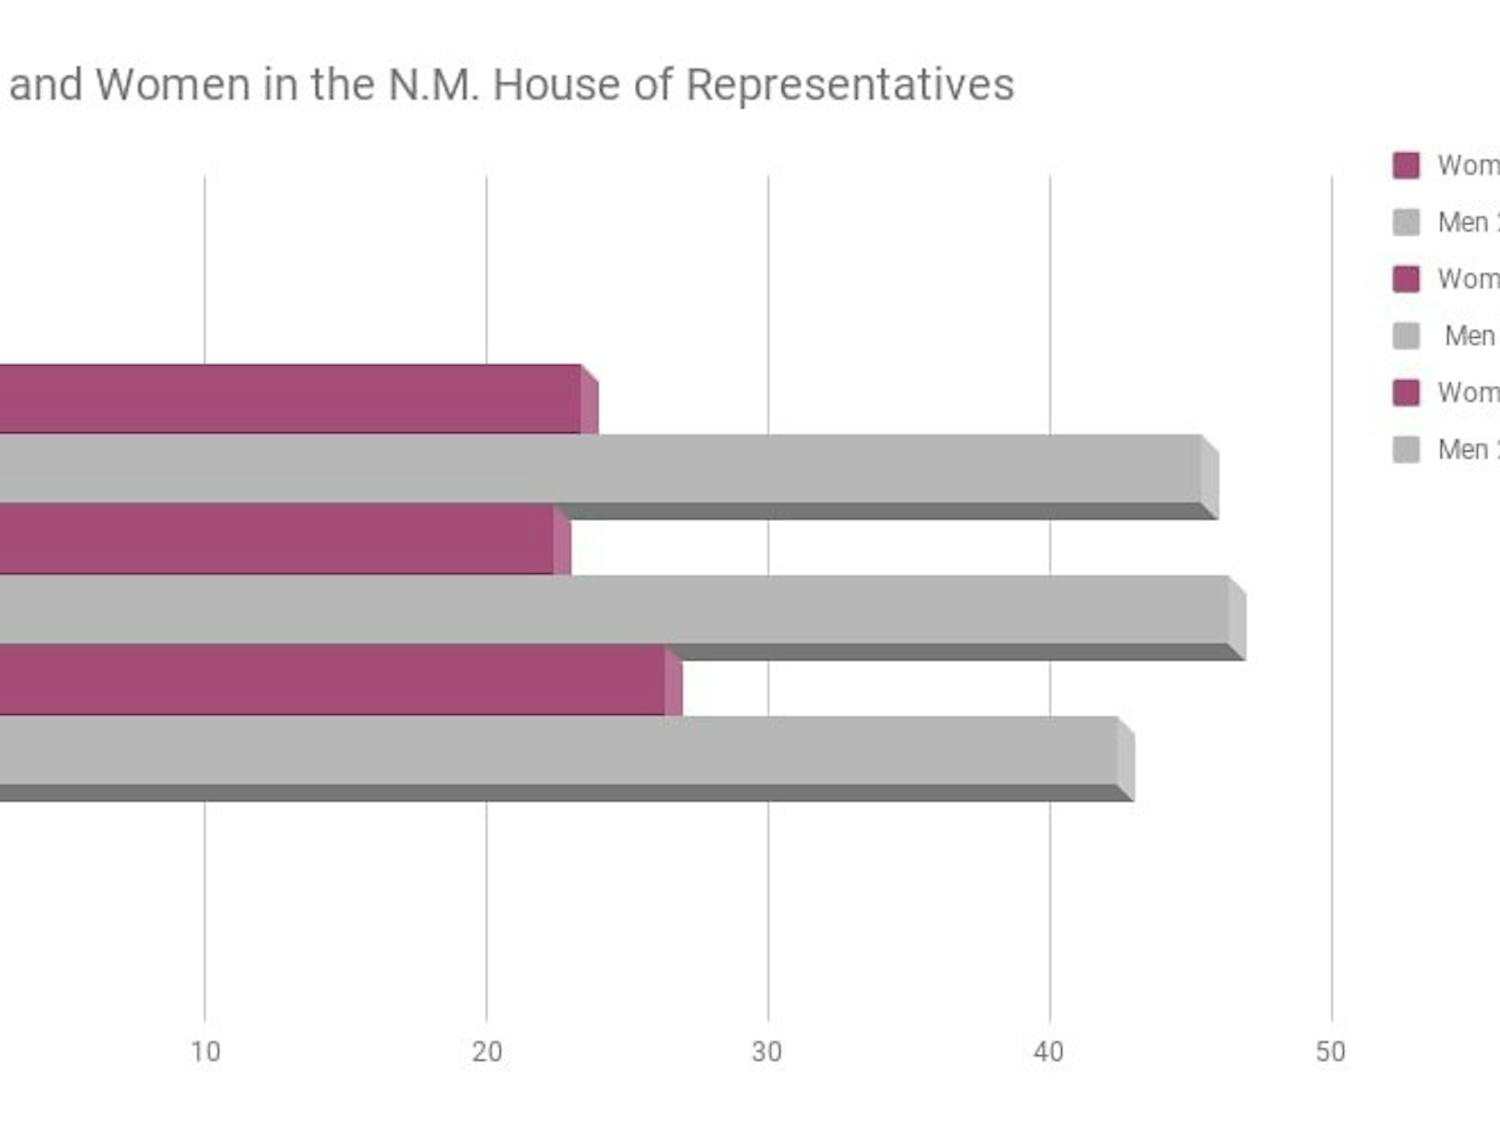 Graph depicts the increase of women holding office in the N.M. House of Representatives the past three election cycles.